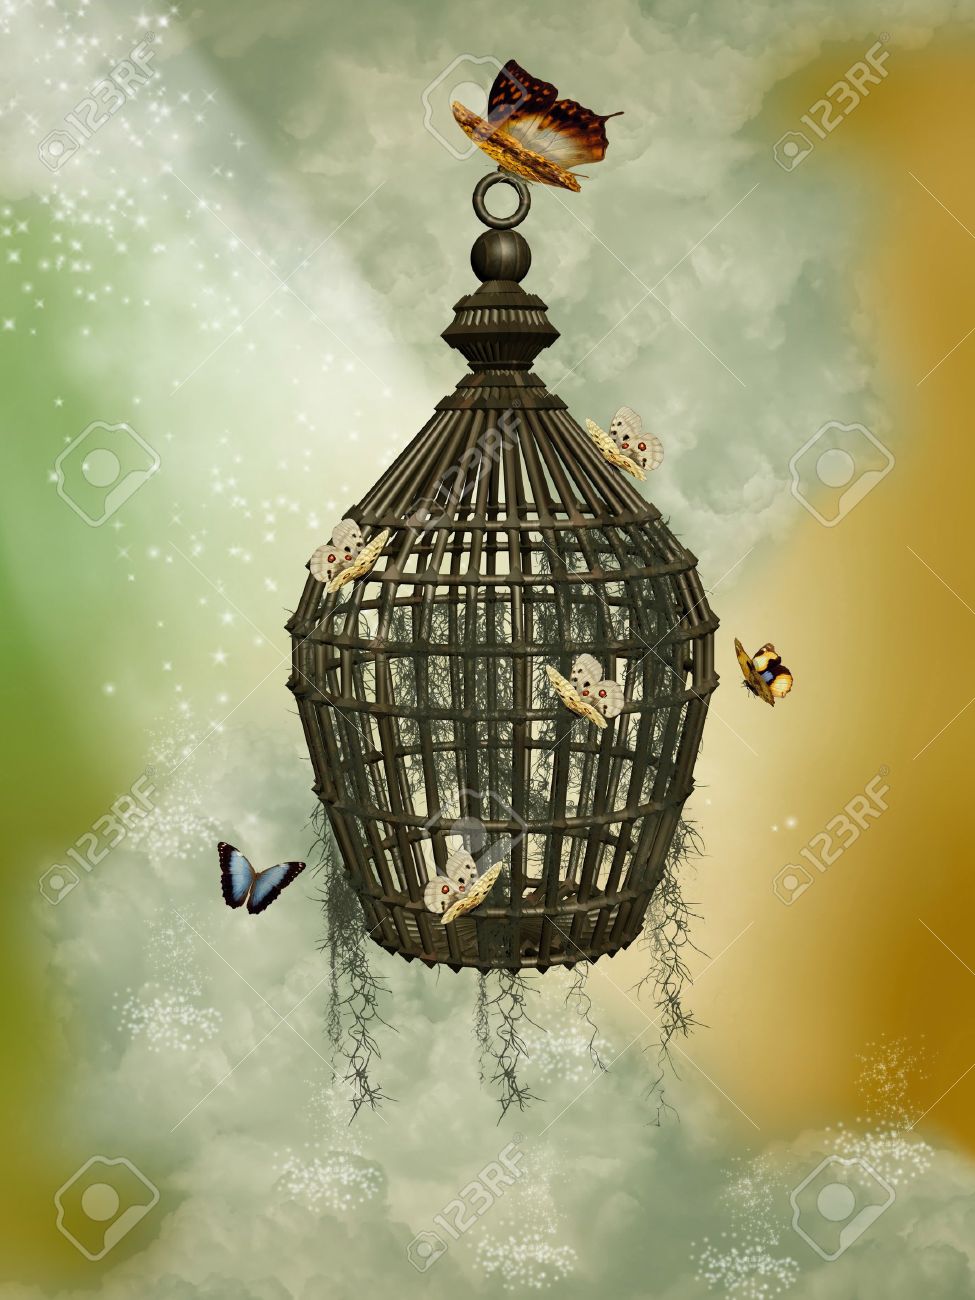 11791796-fantasy-cage-with-butterflies-in-the-sky.jpg